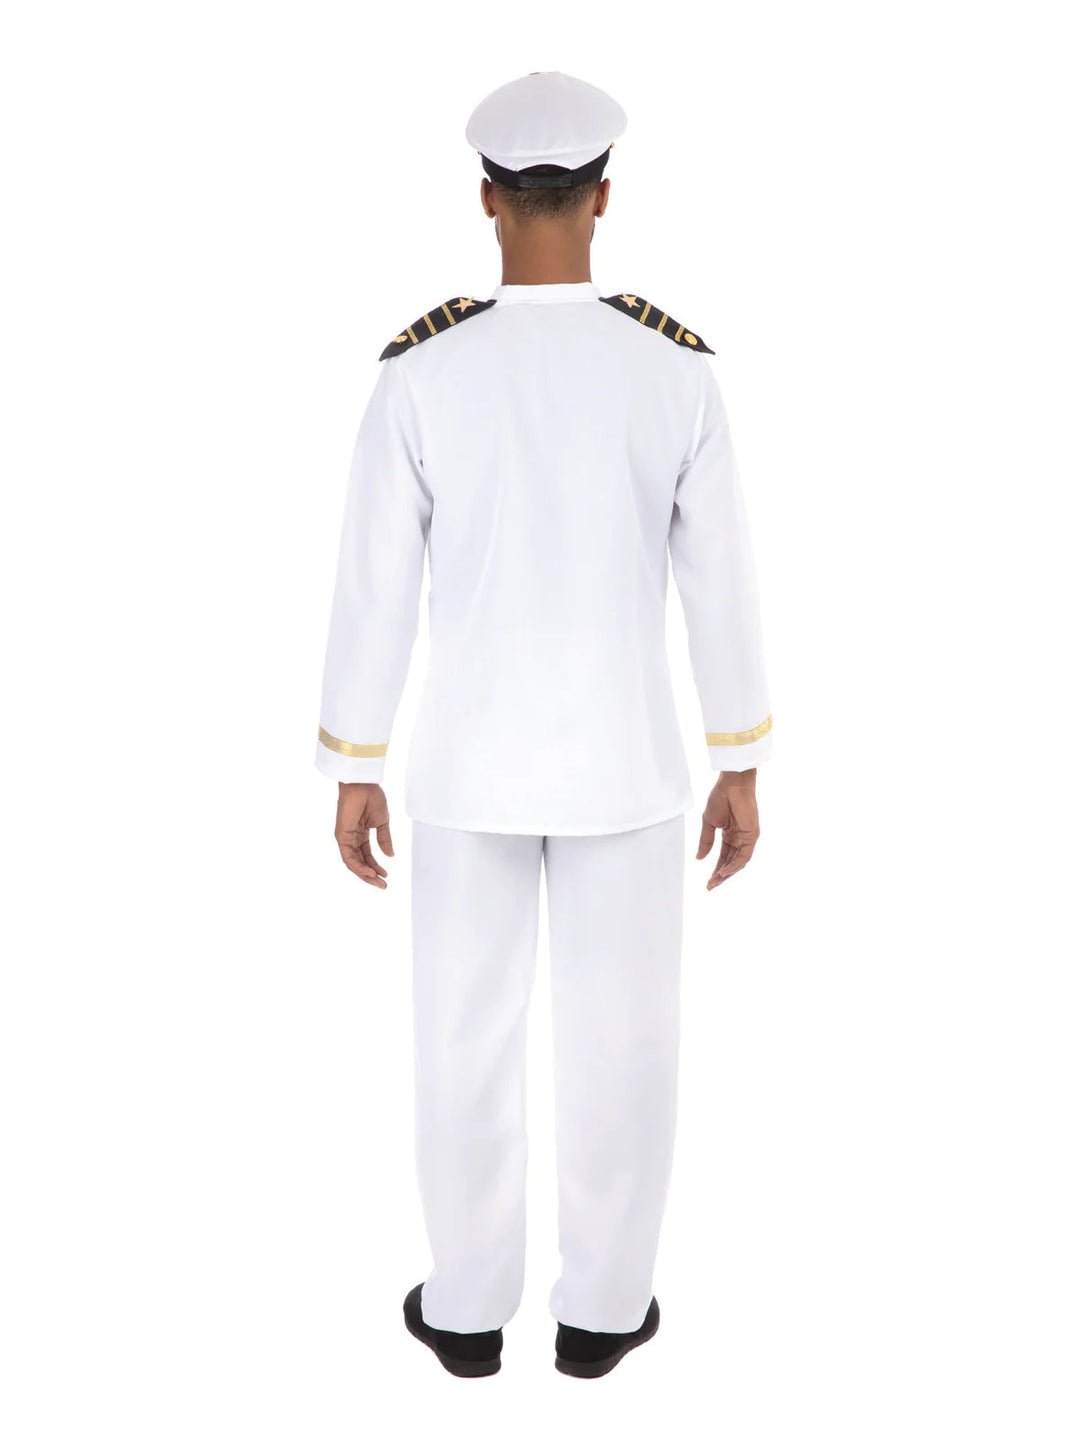 Navy Officer with Hat Top Gun Costume_2